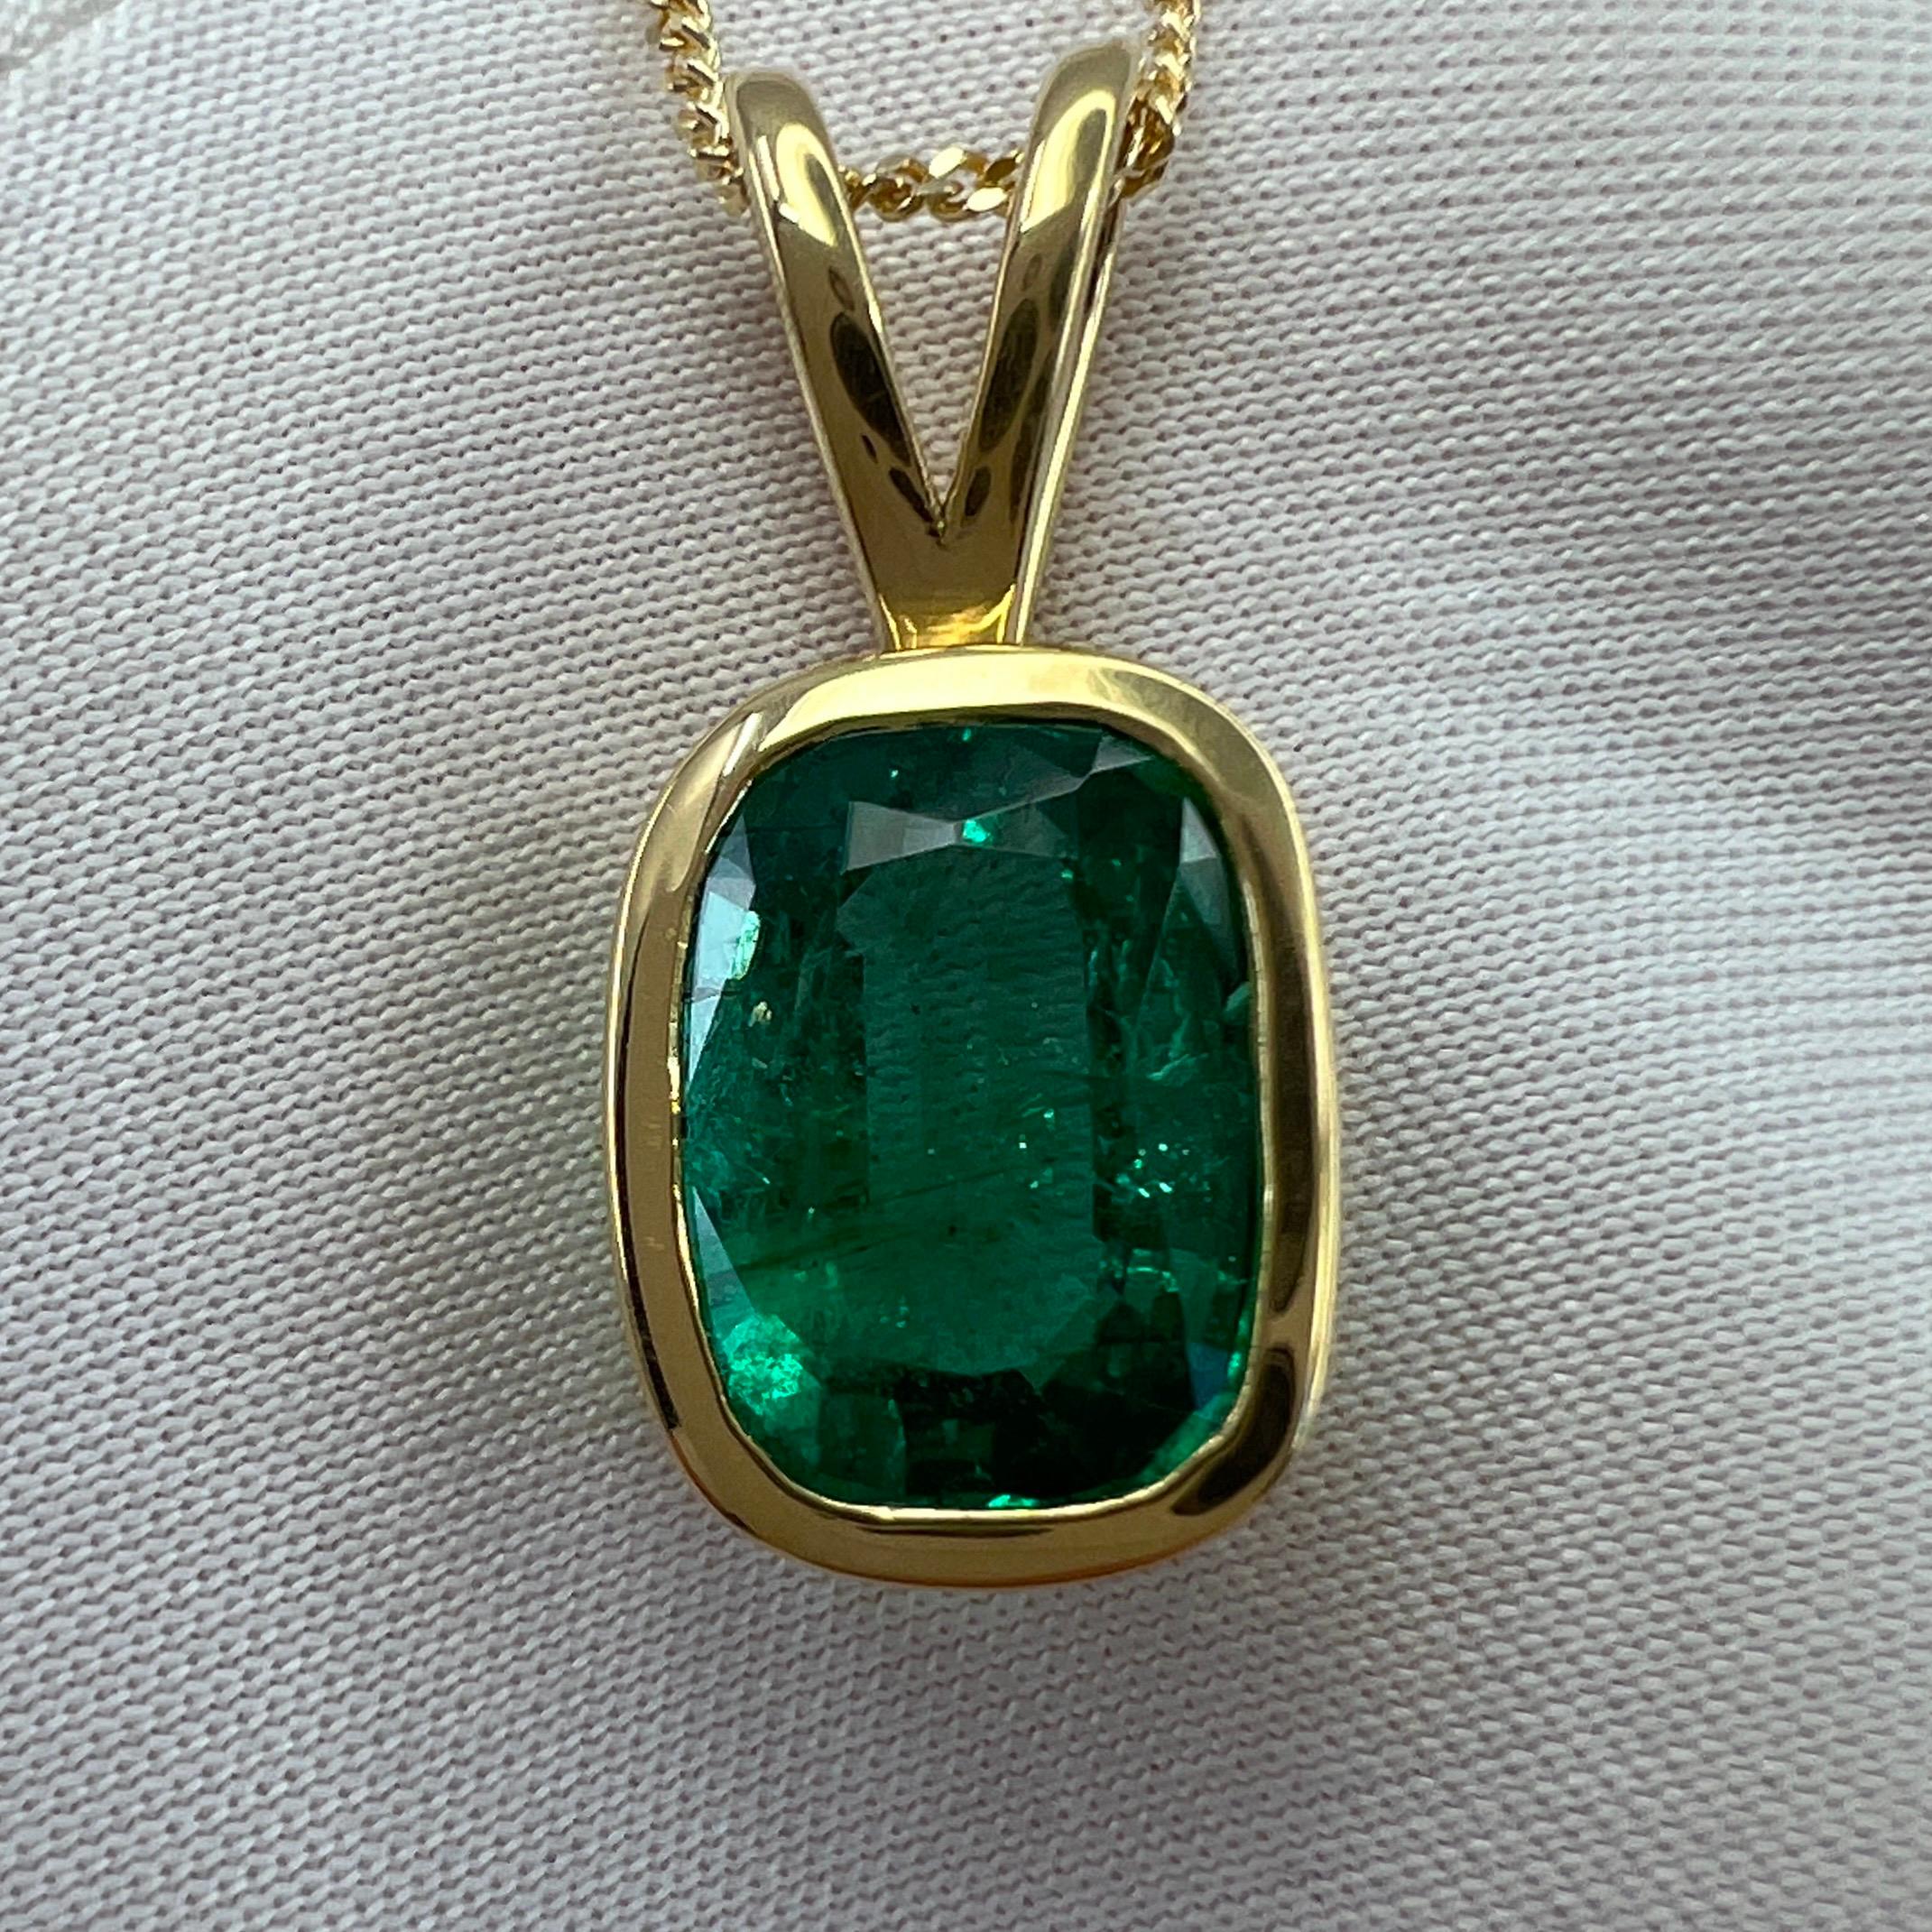 Fine Vivid Green Emerald 18k Yellow Gold Solitaire Pendant Necklace.

2.75 Carat emerald with a fine vivid bright green colour and very good clarity. Some small natural inclusions visible (as expected with emeralds) but not a dirty stone.

A fine